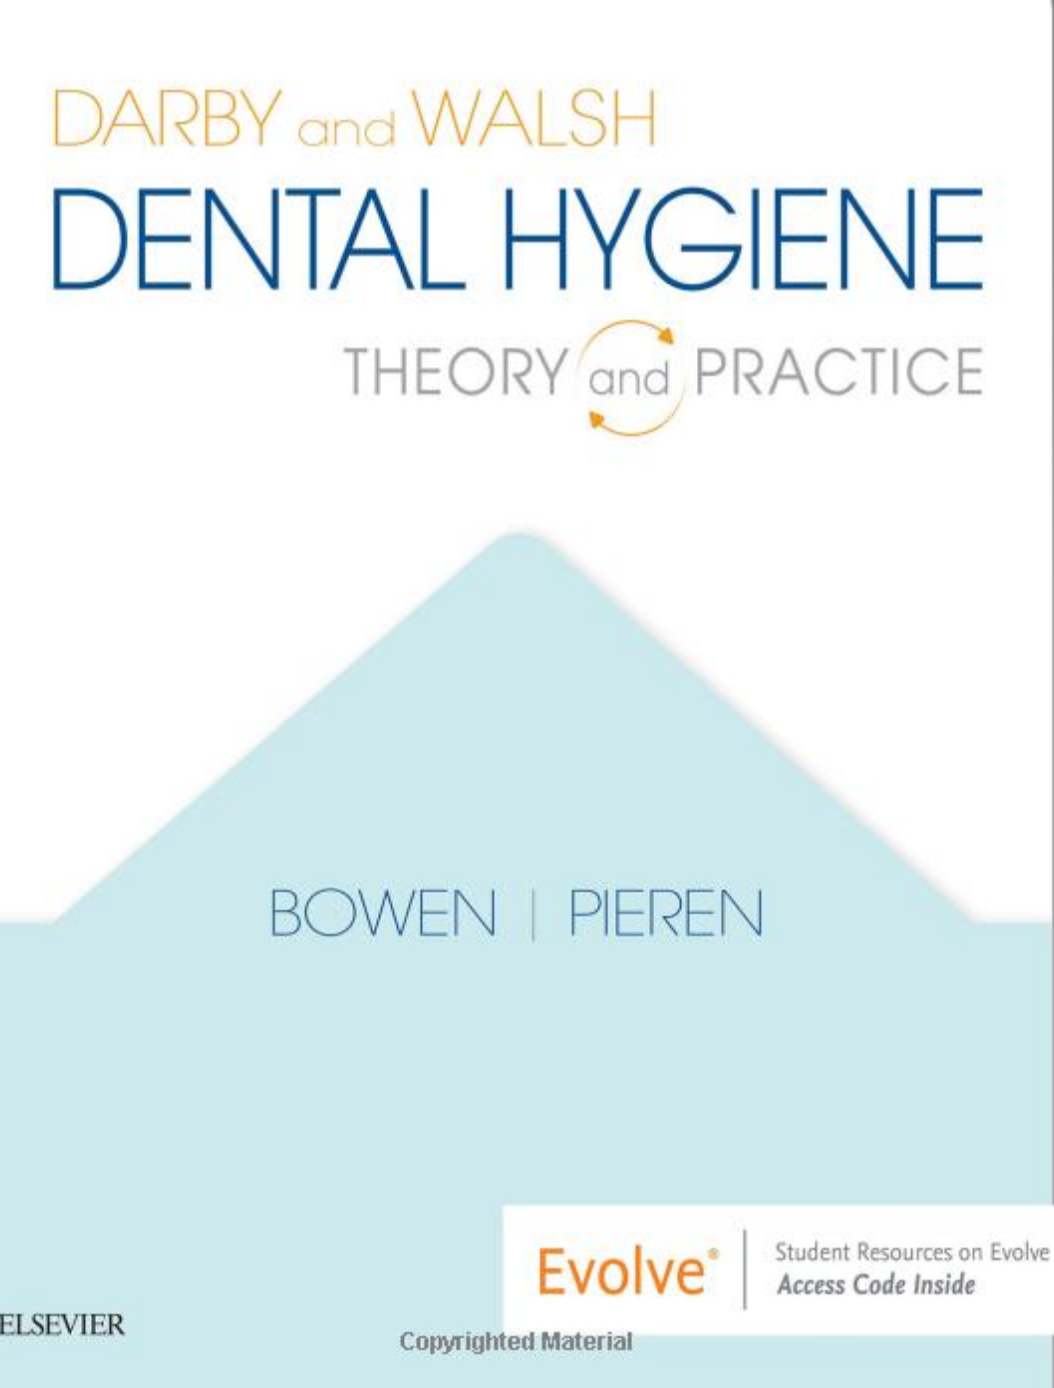 the 5th edition of Darby and Walsh Dental Hygiene: Theory and Practice published by Elsevier.